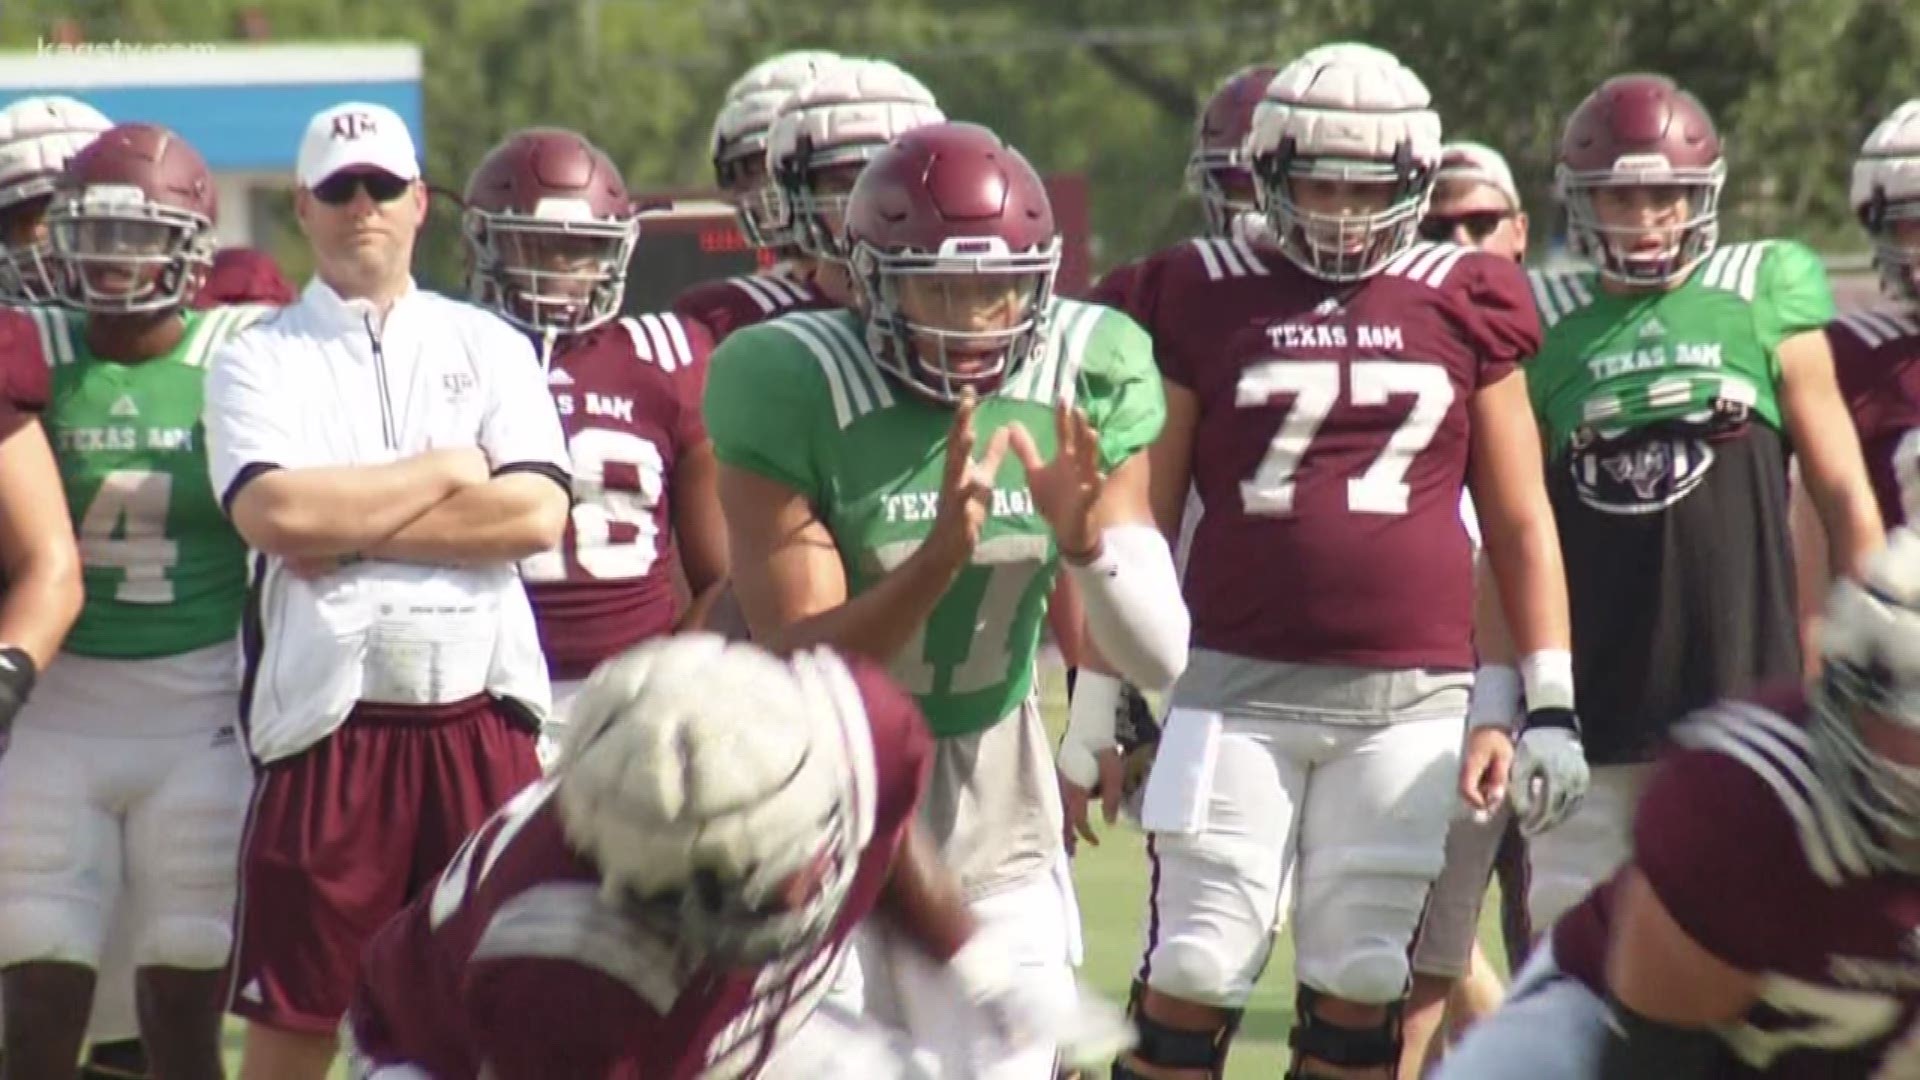 The Texas A&M football team had the day off on Friday, but will return to the practice field on Saturday. So far through fall camp, Kellen Mond has head coach Jimbo Fisher believing he's on the verge of becoming an elite quarterback.